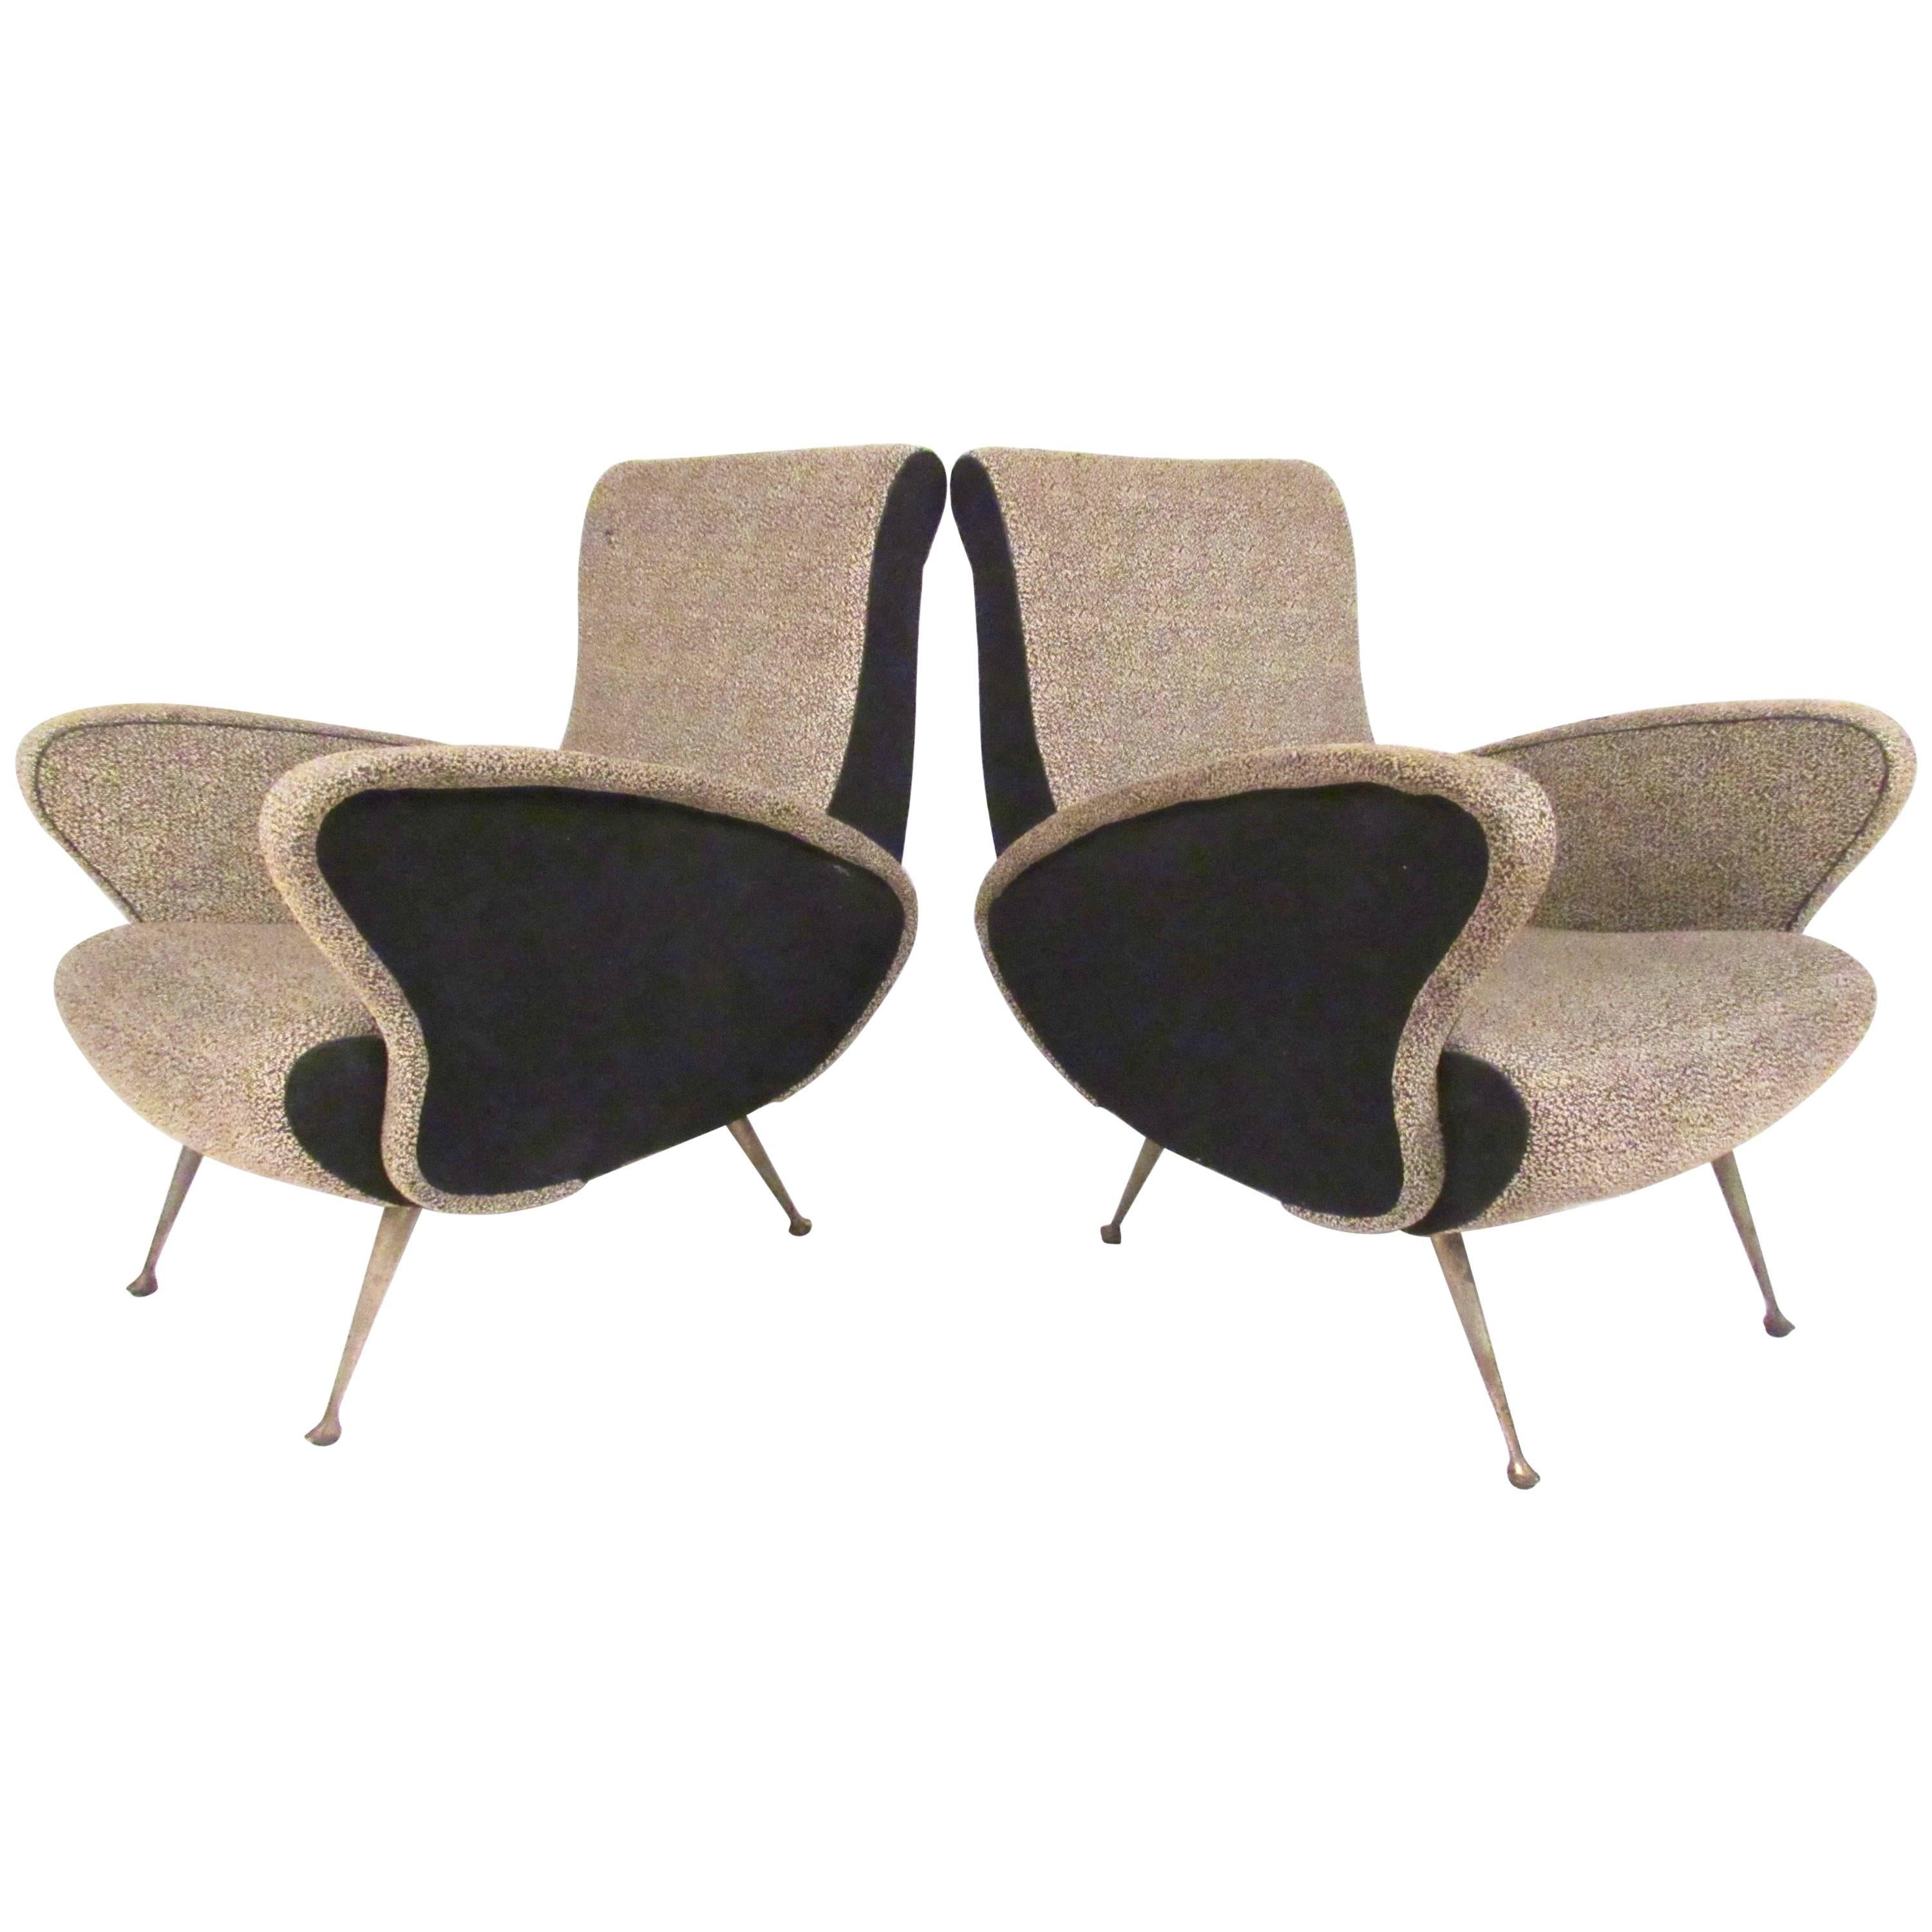 Pair of Italian Modern Sculptural Lounge Chairs For Sale